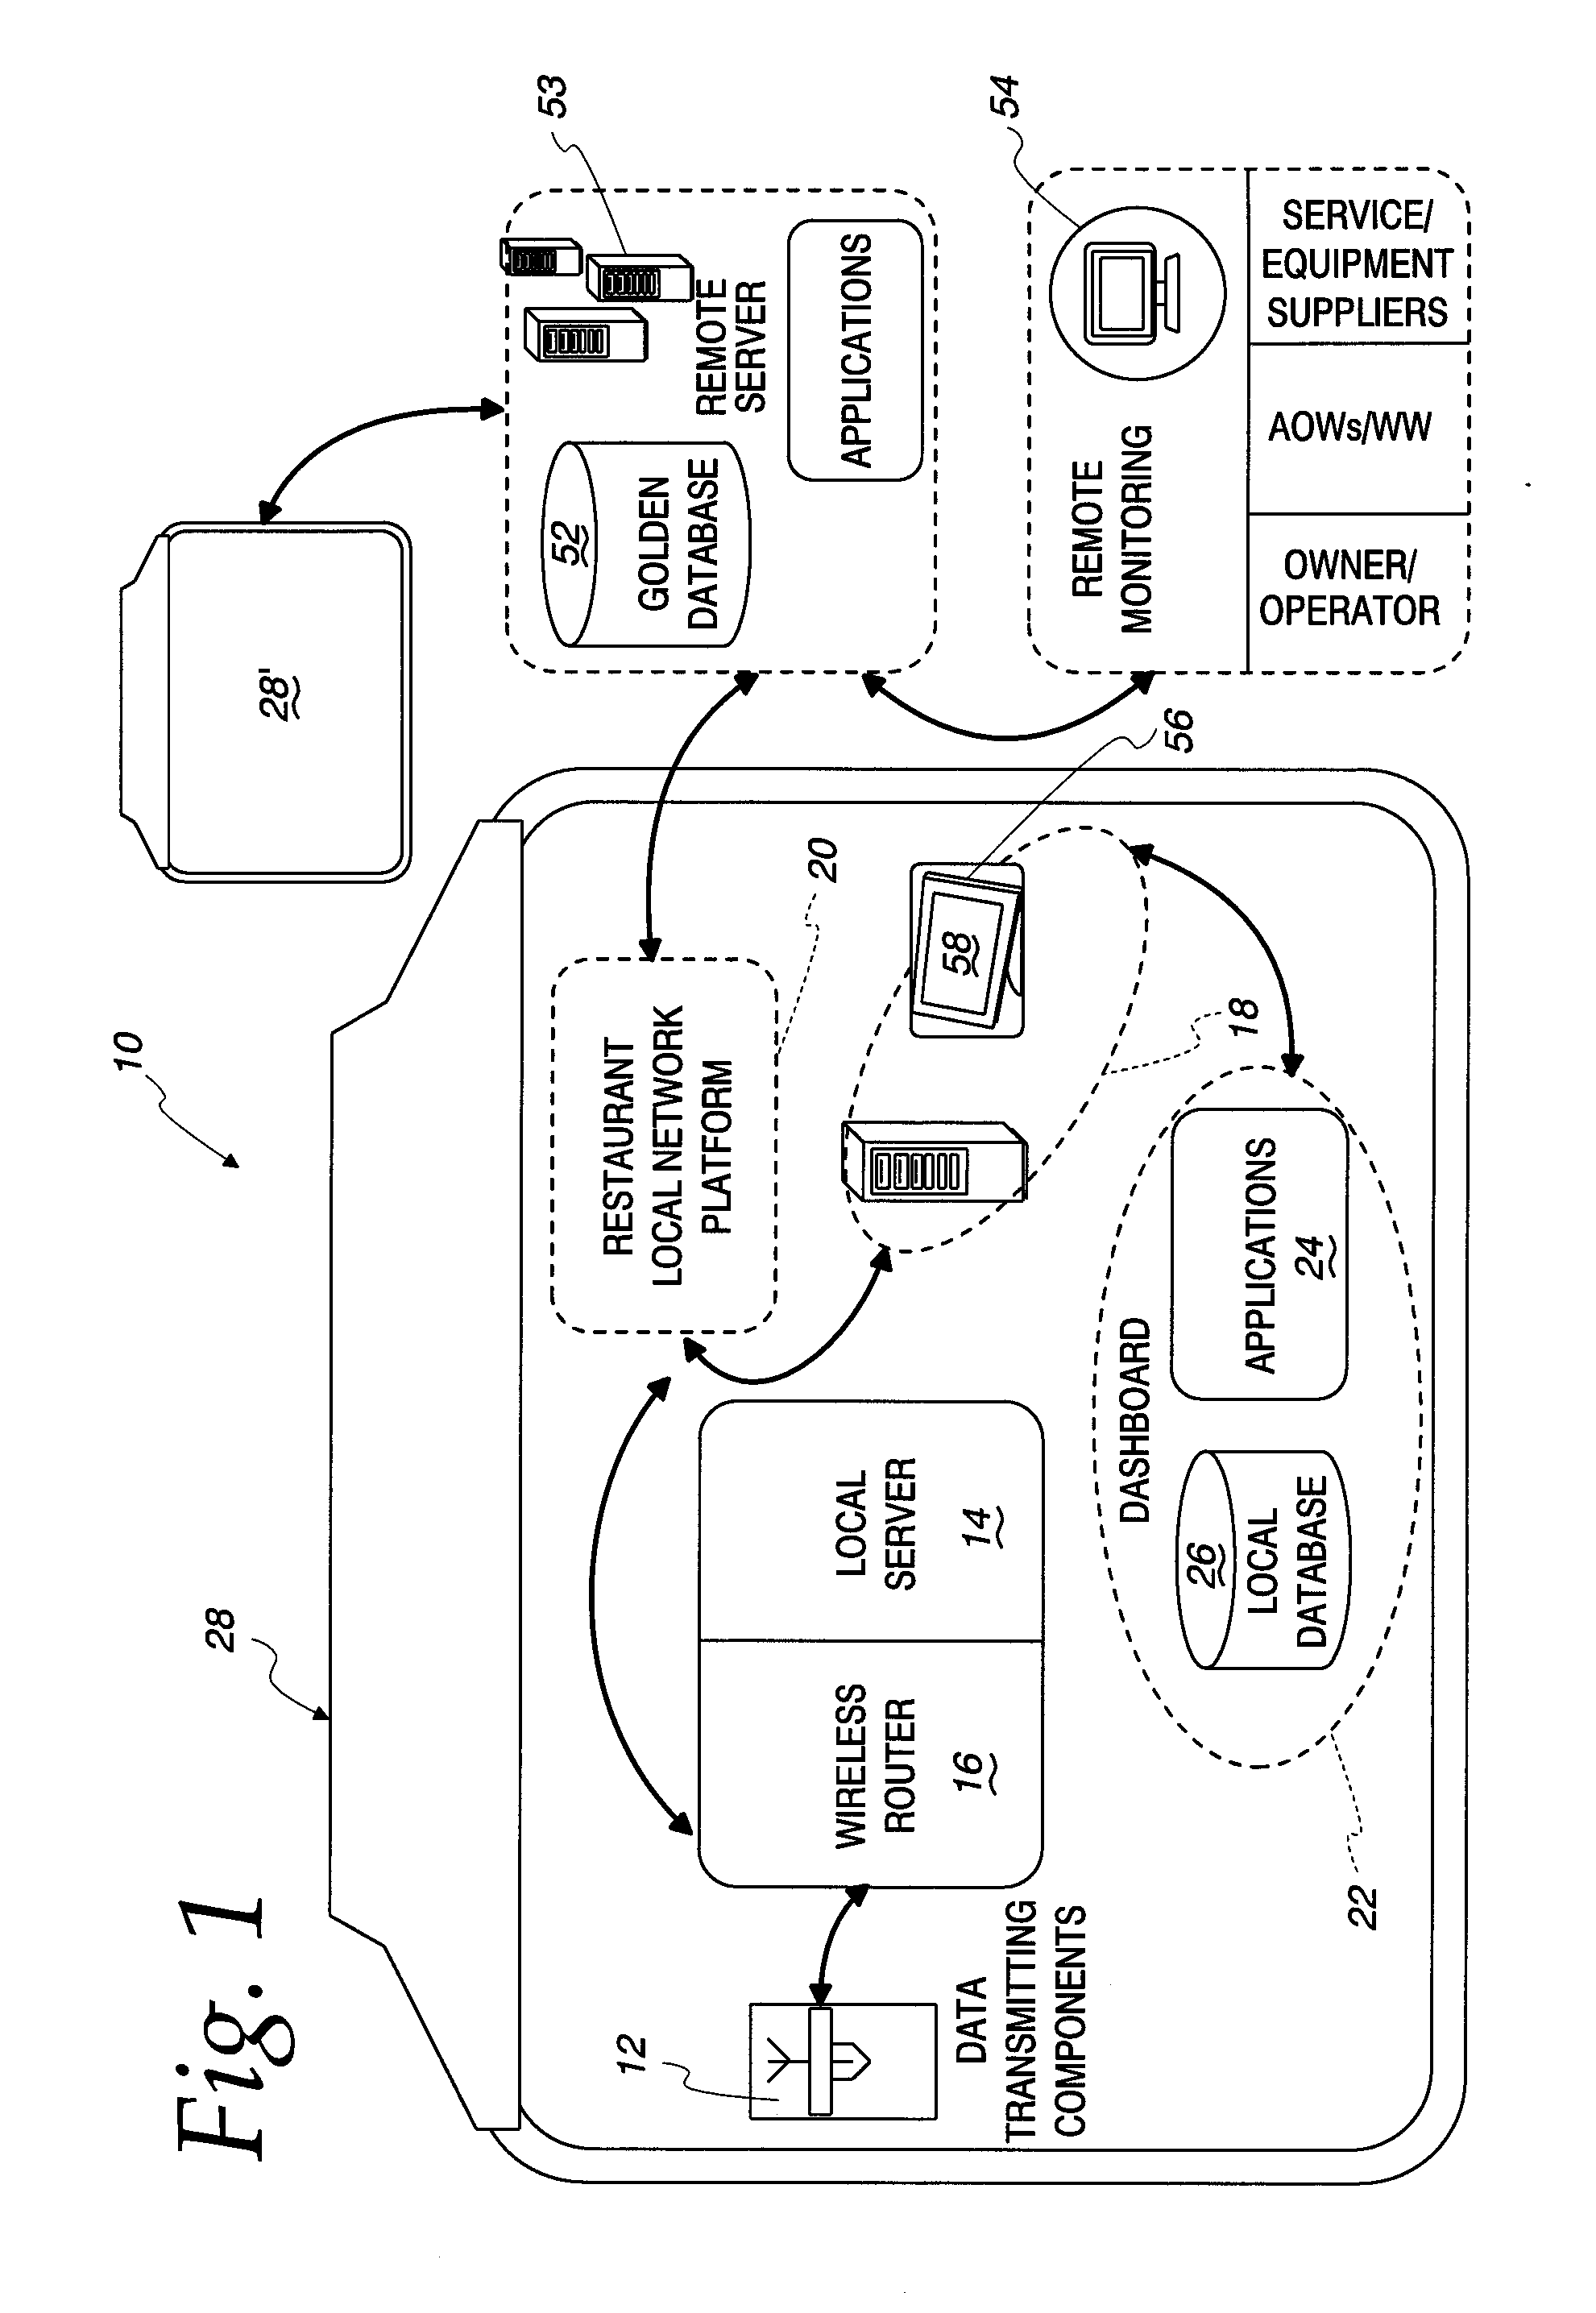 Restaurant Equipment Monitoring and Control System and Method